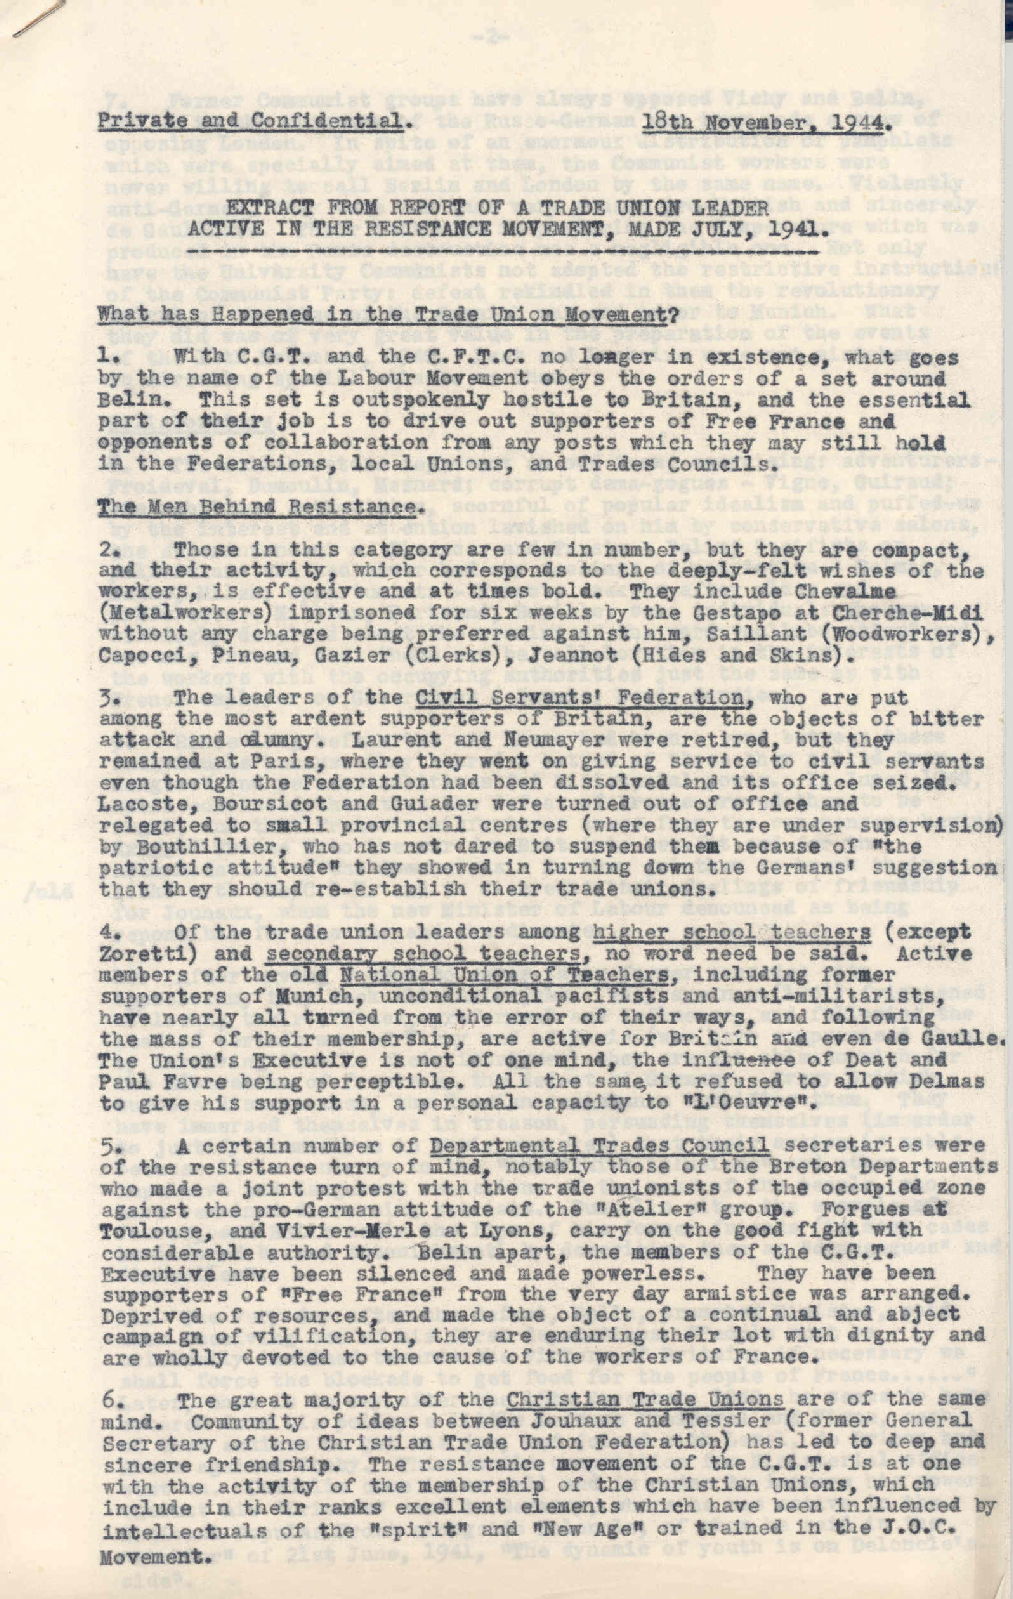 'Extract from report of a trade union leader active in the resistance movement, made July, 1941'